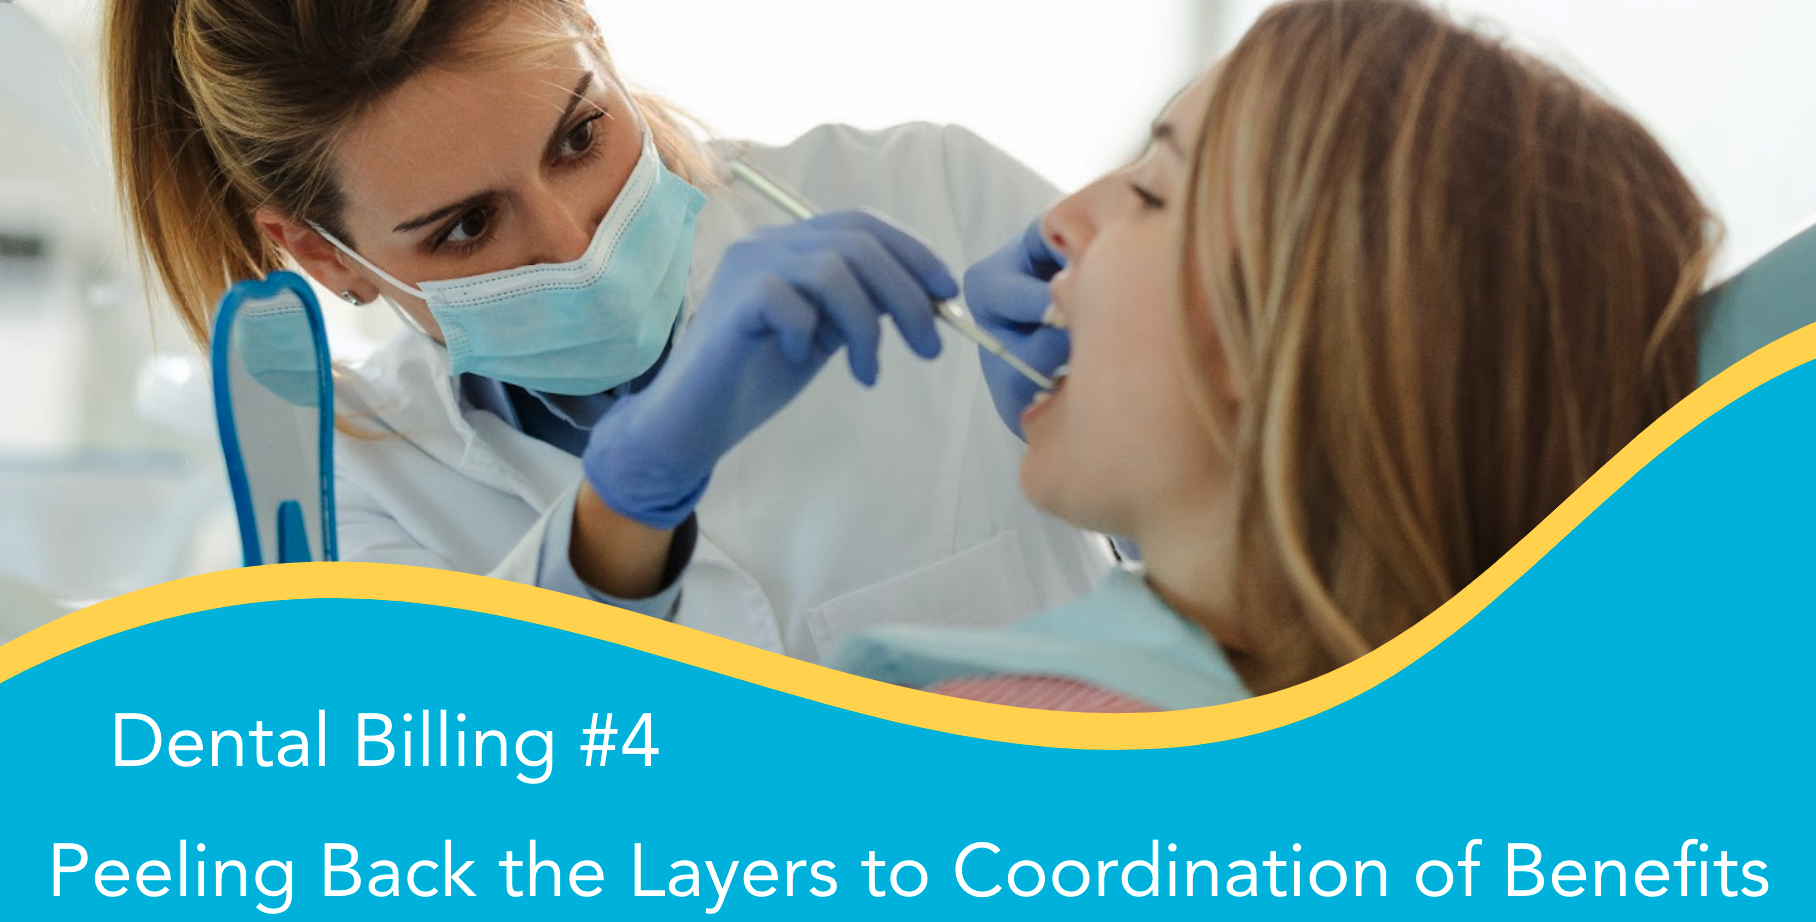 Advanced Dental Billing Module #4 Peeling Back the Layers to Coordination of Benefits (1.0 CE)